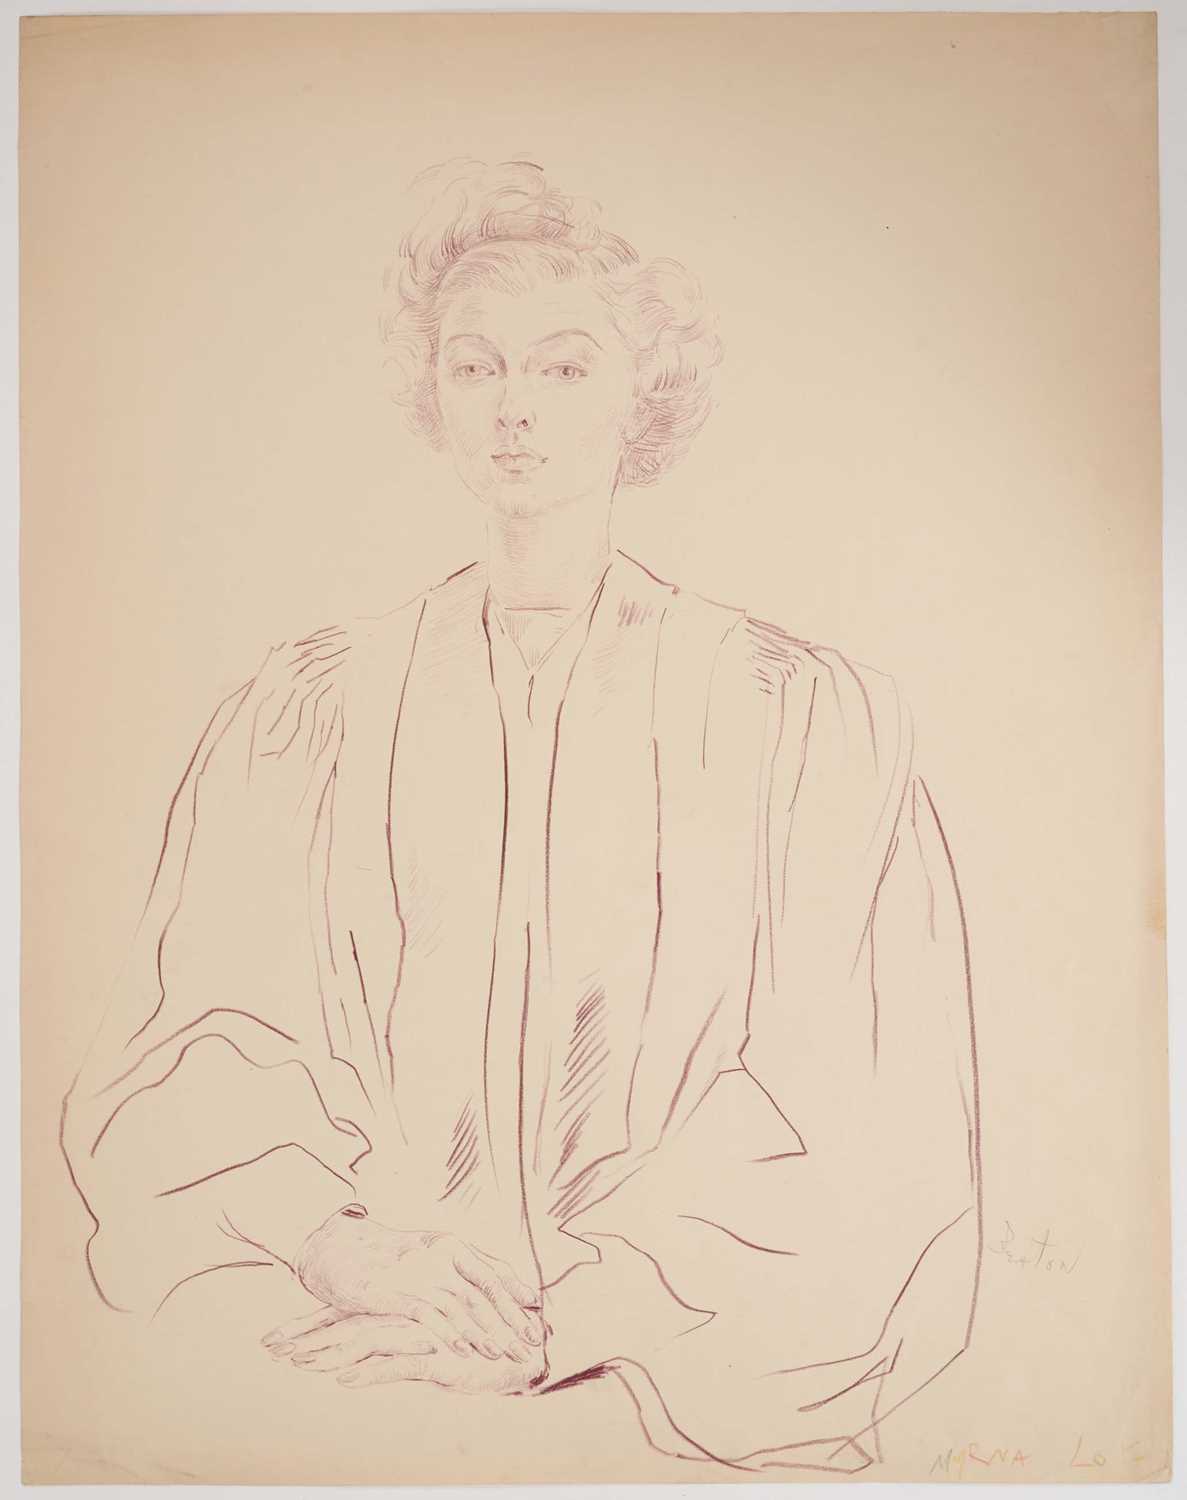 Lot 46 - *Cecil Beaton (1904-1980) pencil portrait, Myrna Loy, signed, titled in coloured pencil lower right, 61cm x 47.5cm, unframed